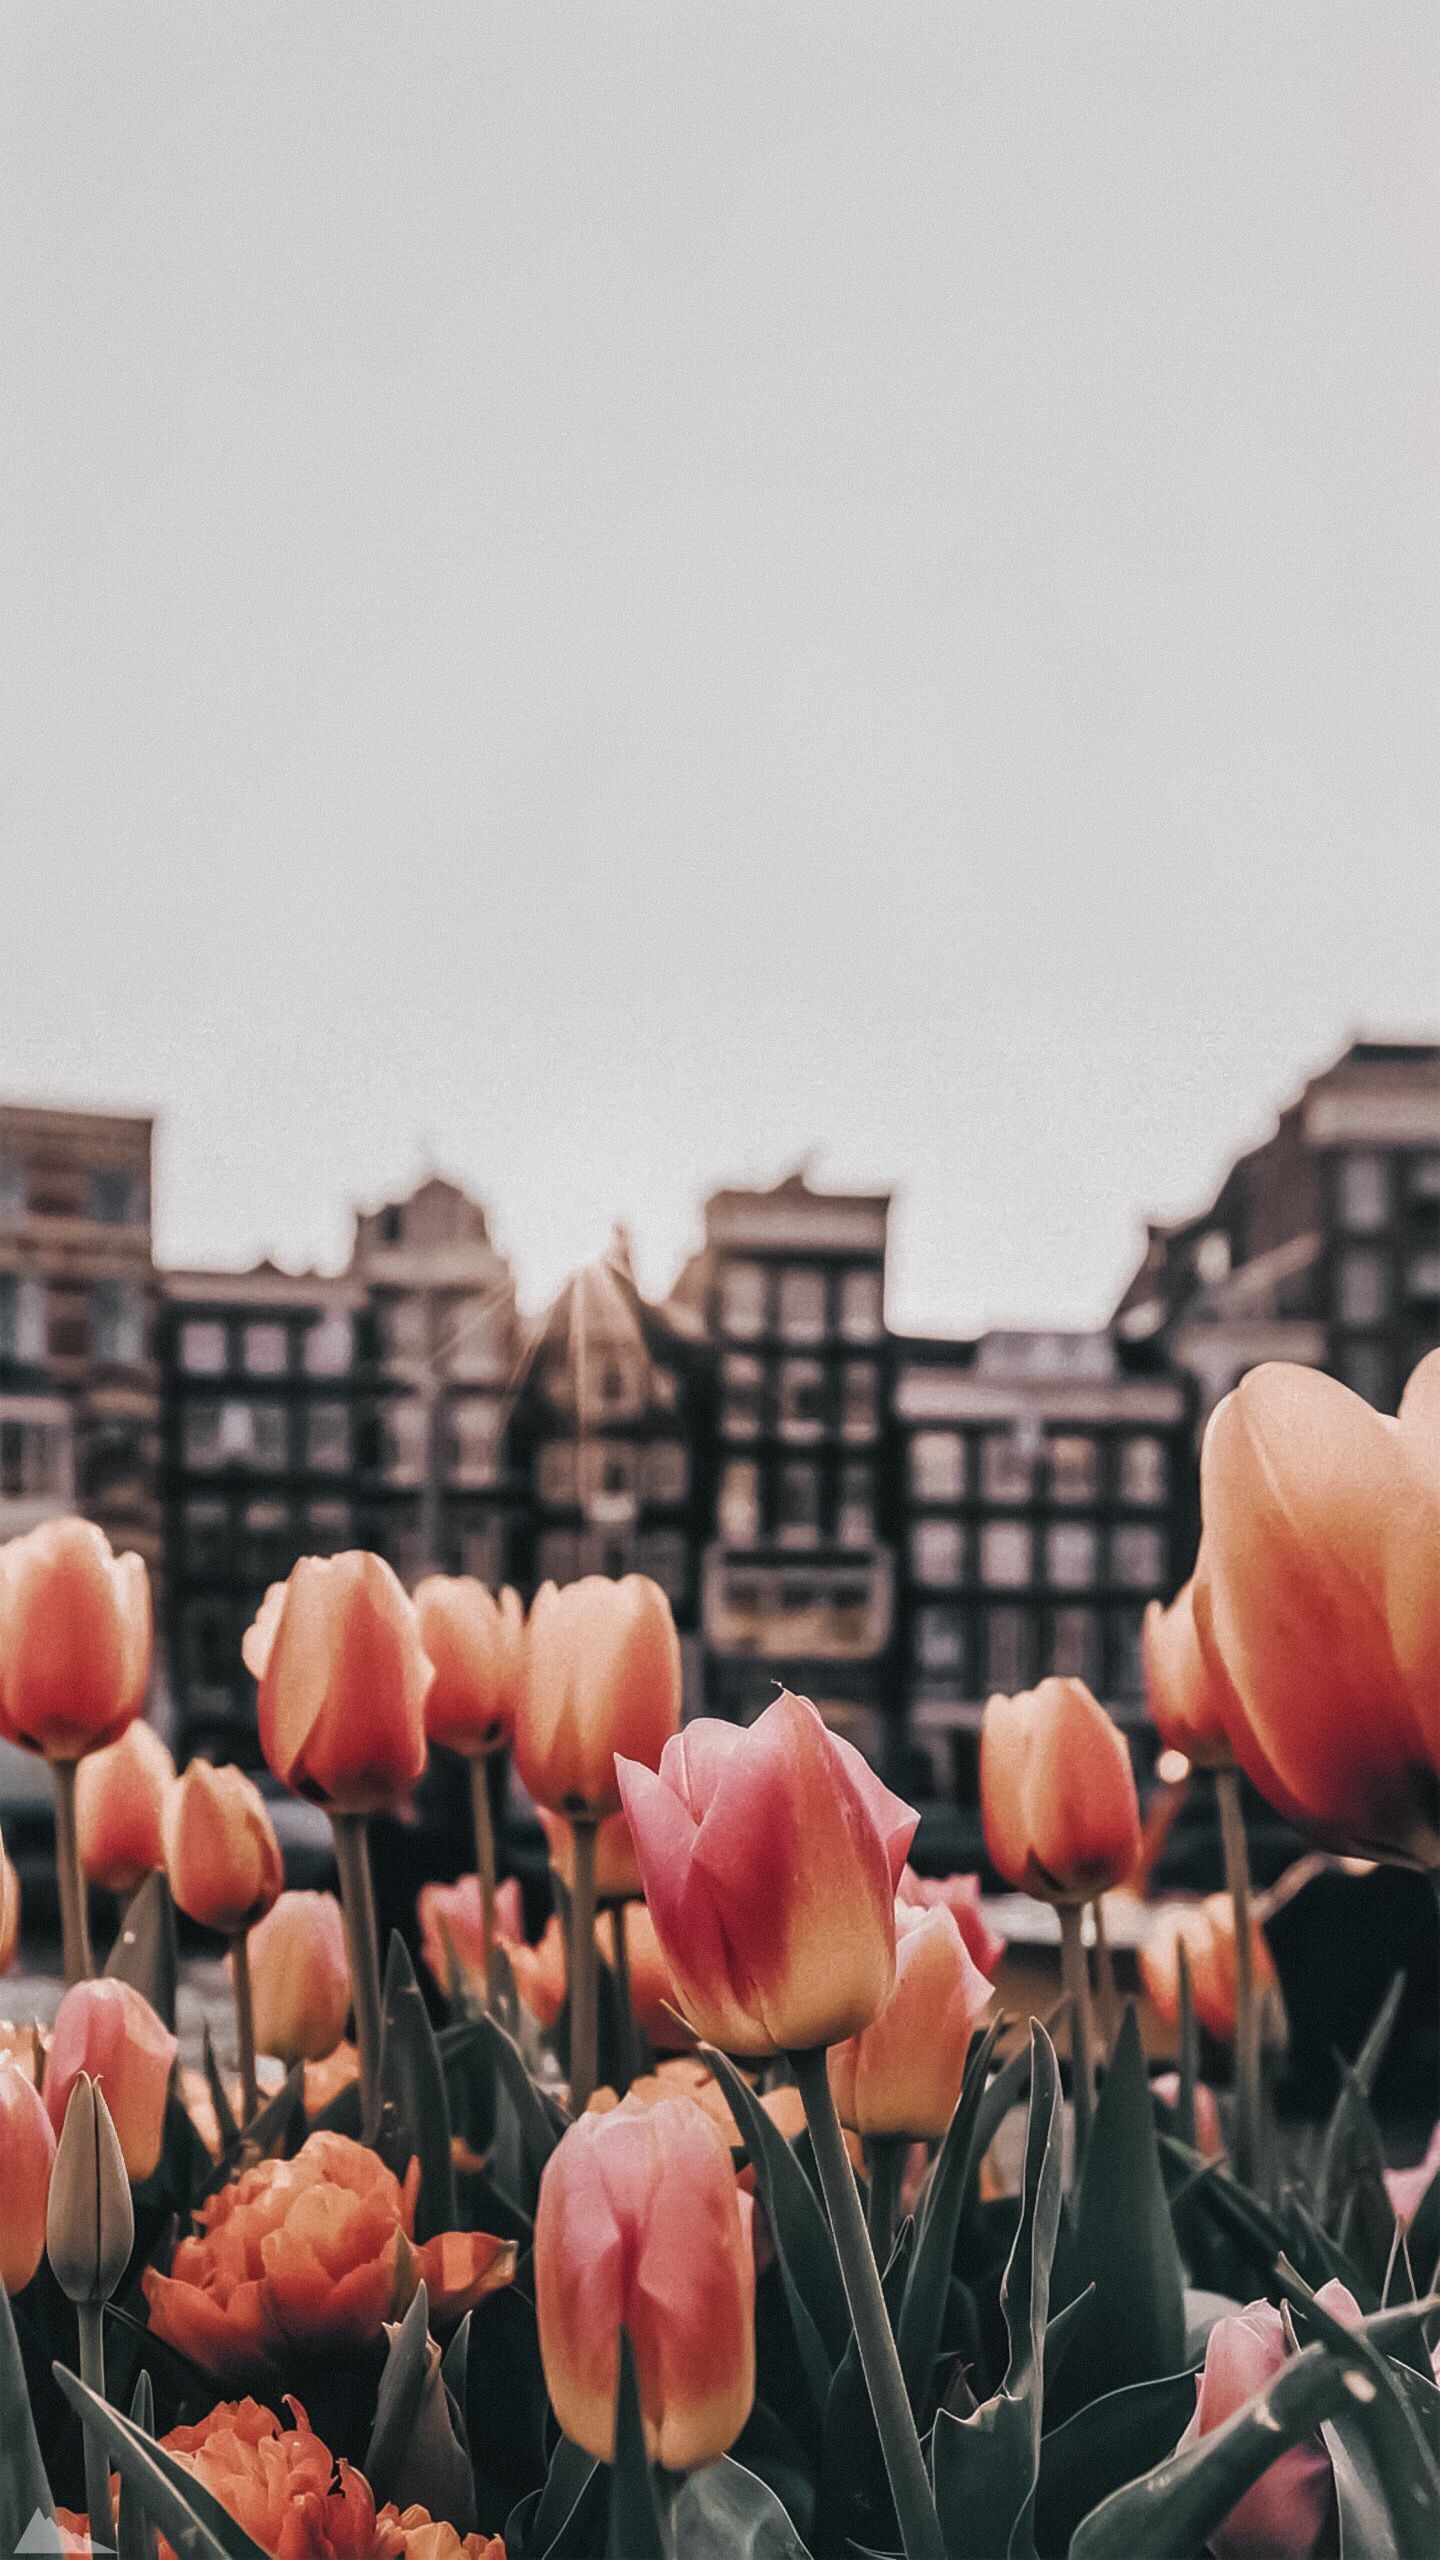 A field of flowers in front some buildings - Tulip